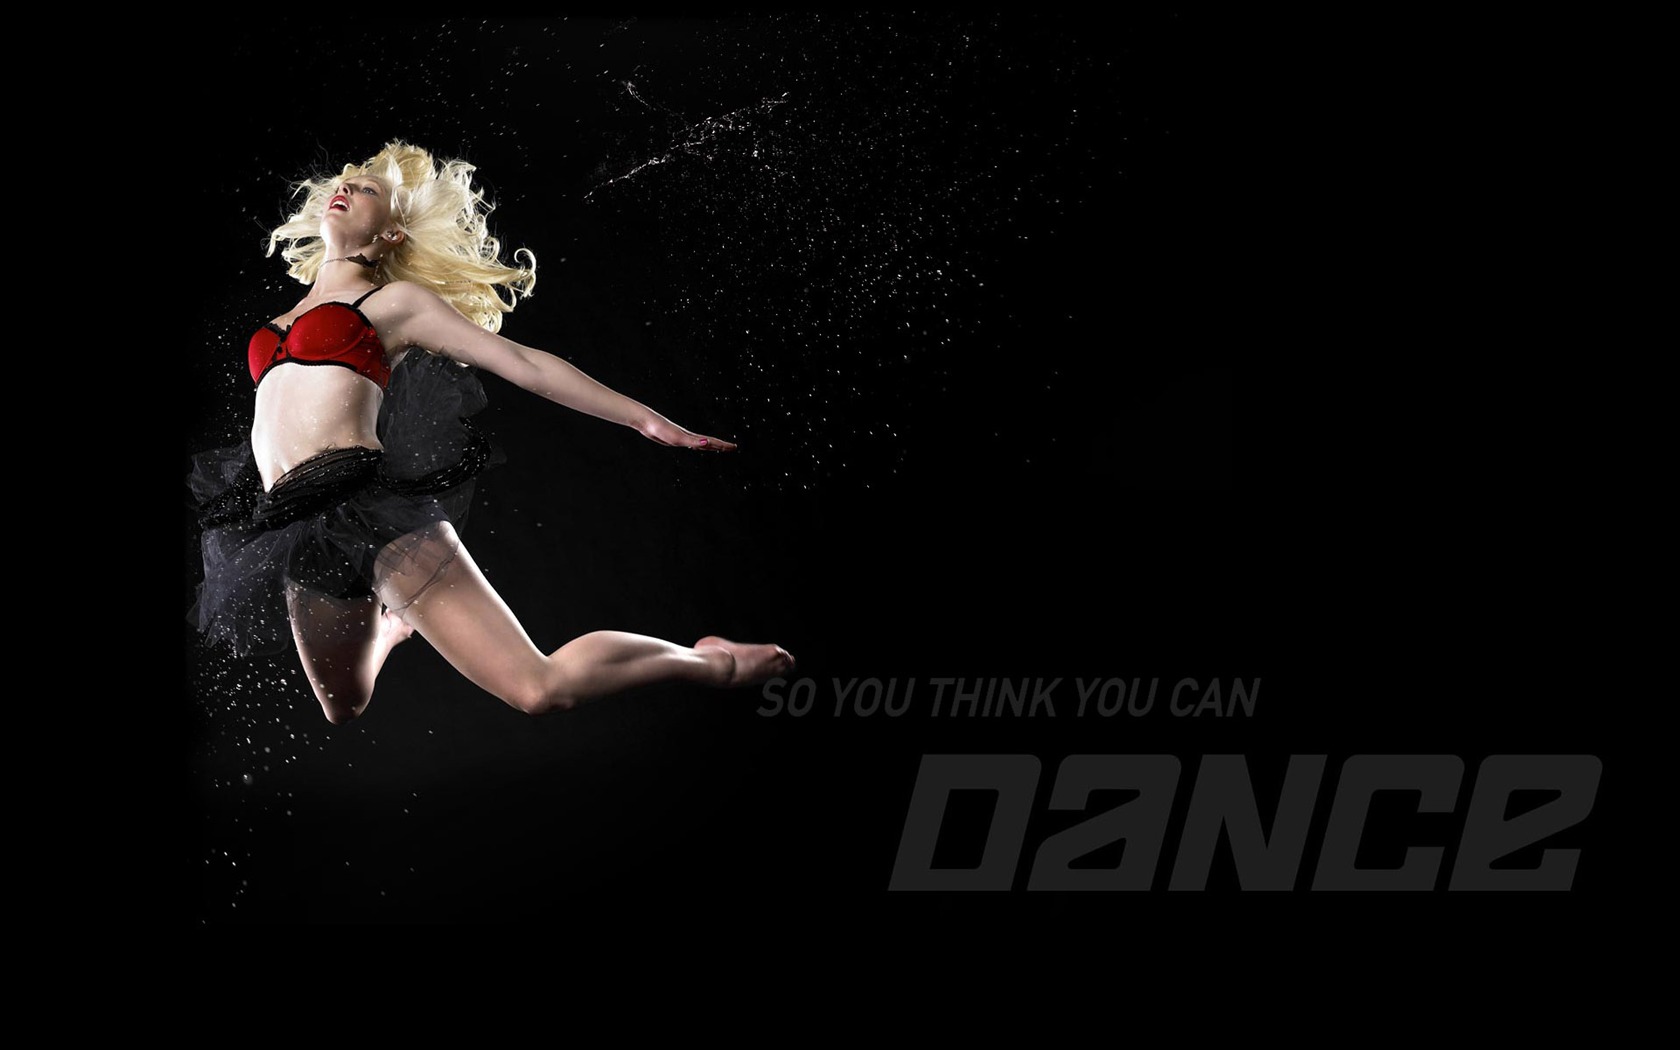 So You Think You Can Dance Wallpaper (1) #13 - 1680x1050